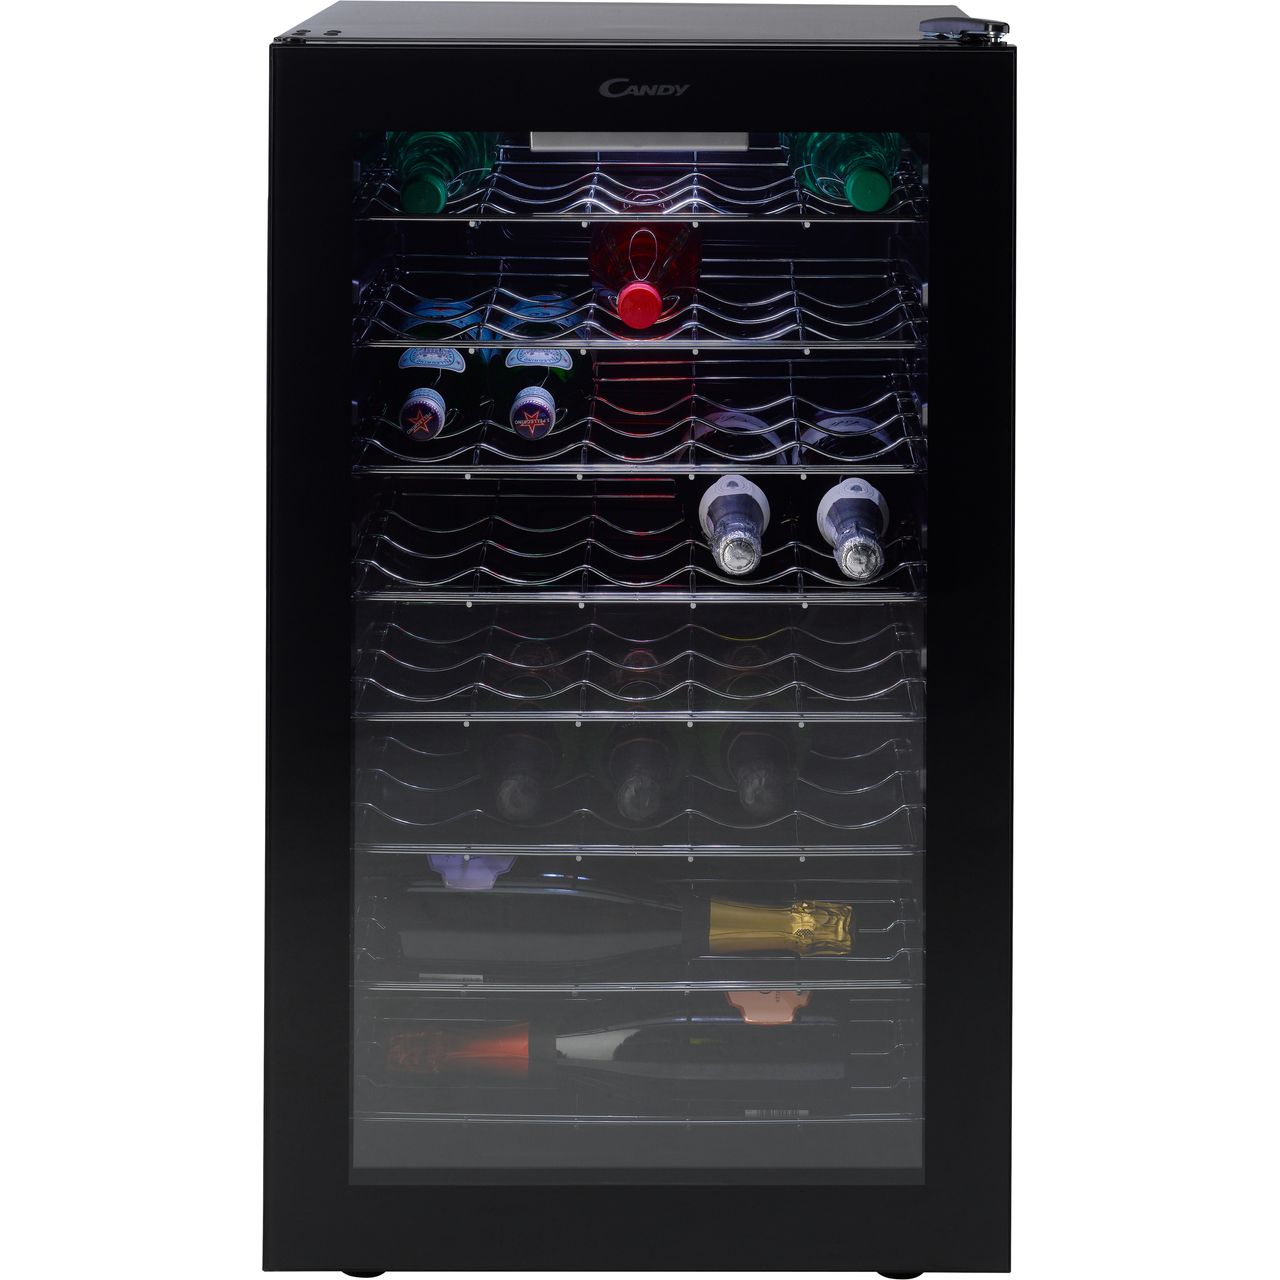 Candy CWC150UK Wine Cooler Review